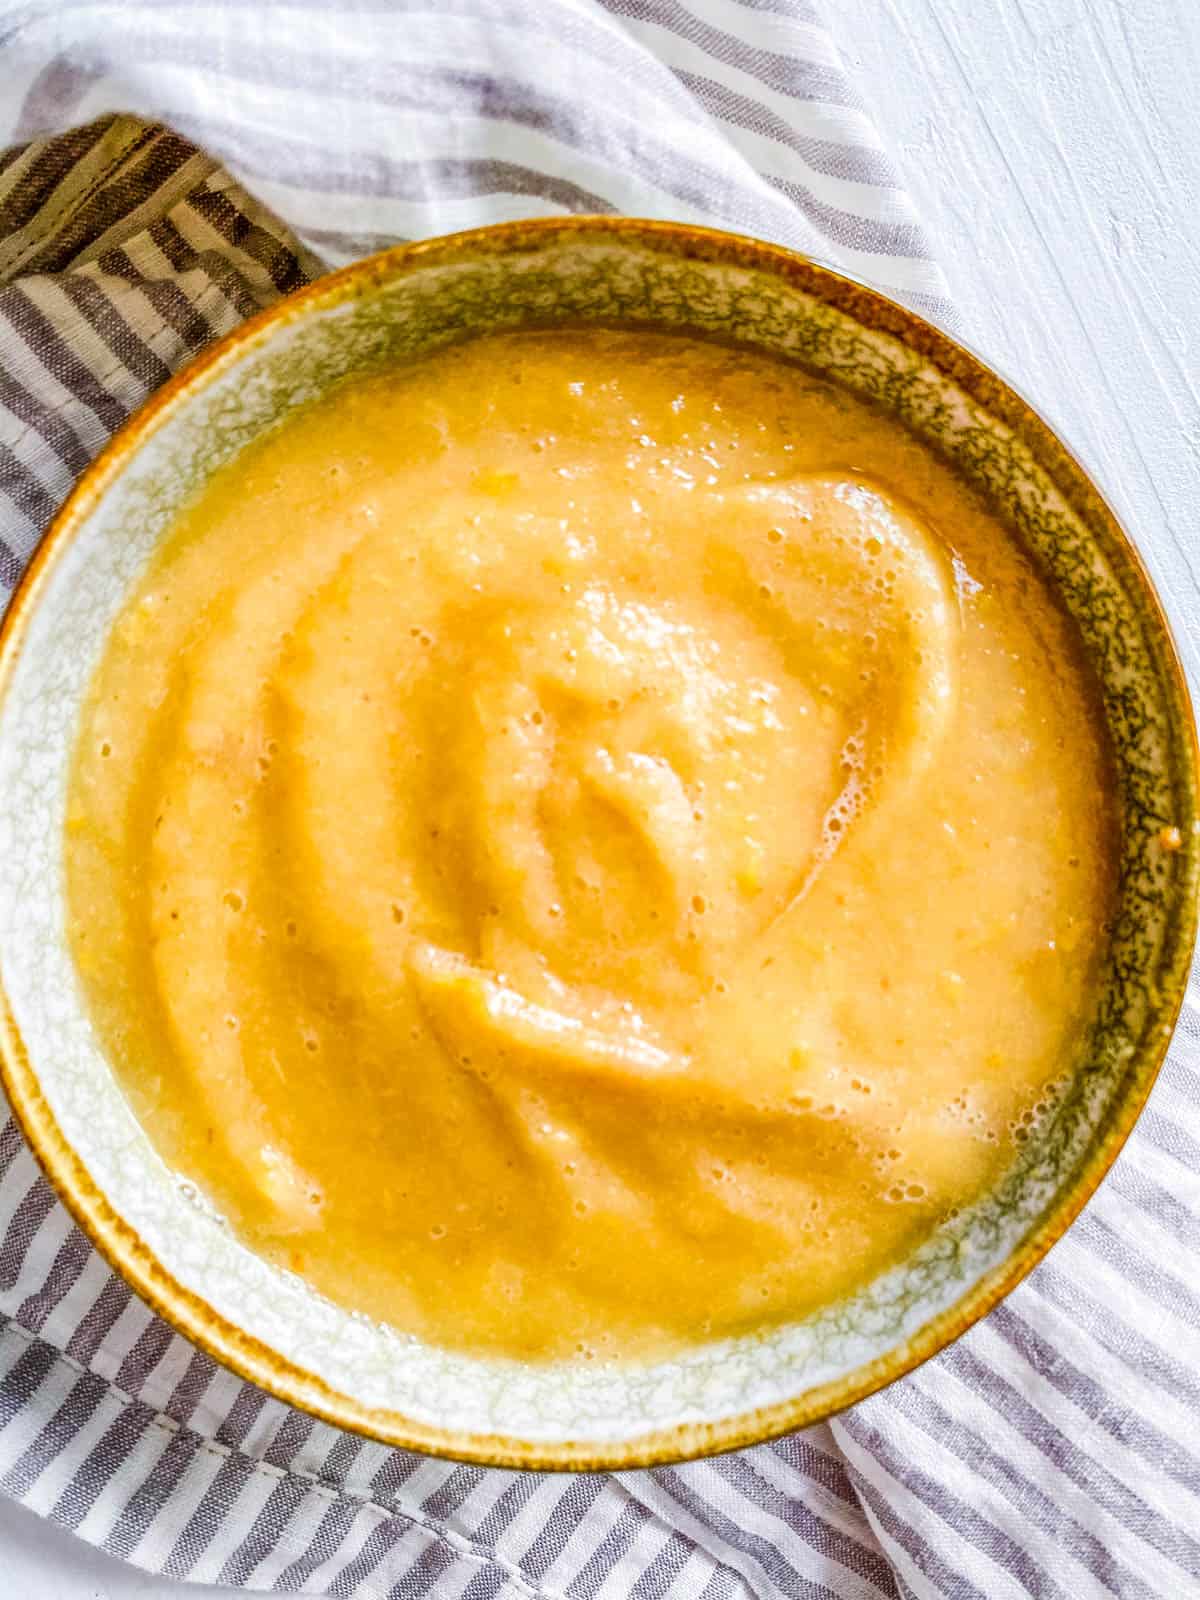 Homemade pear baby food recipe in a small bowl.